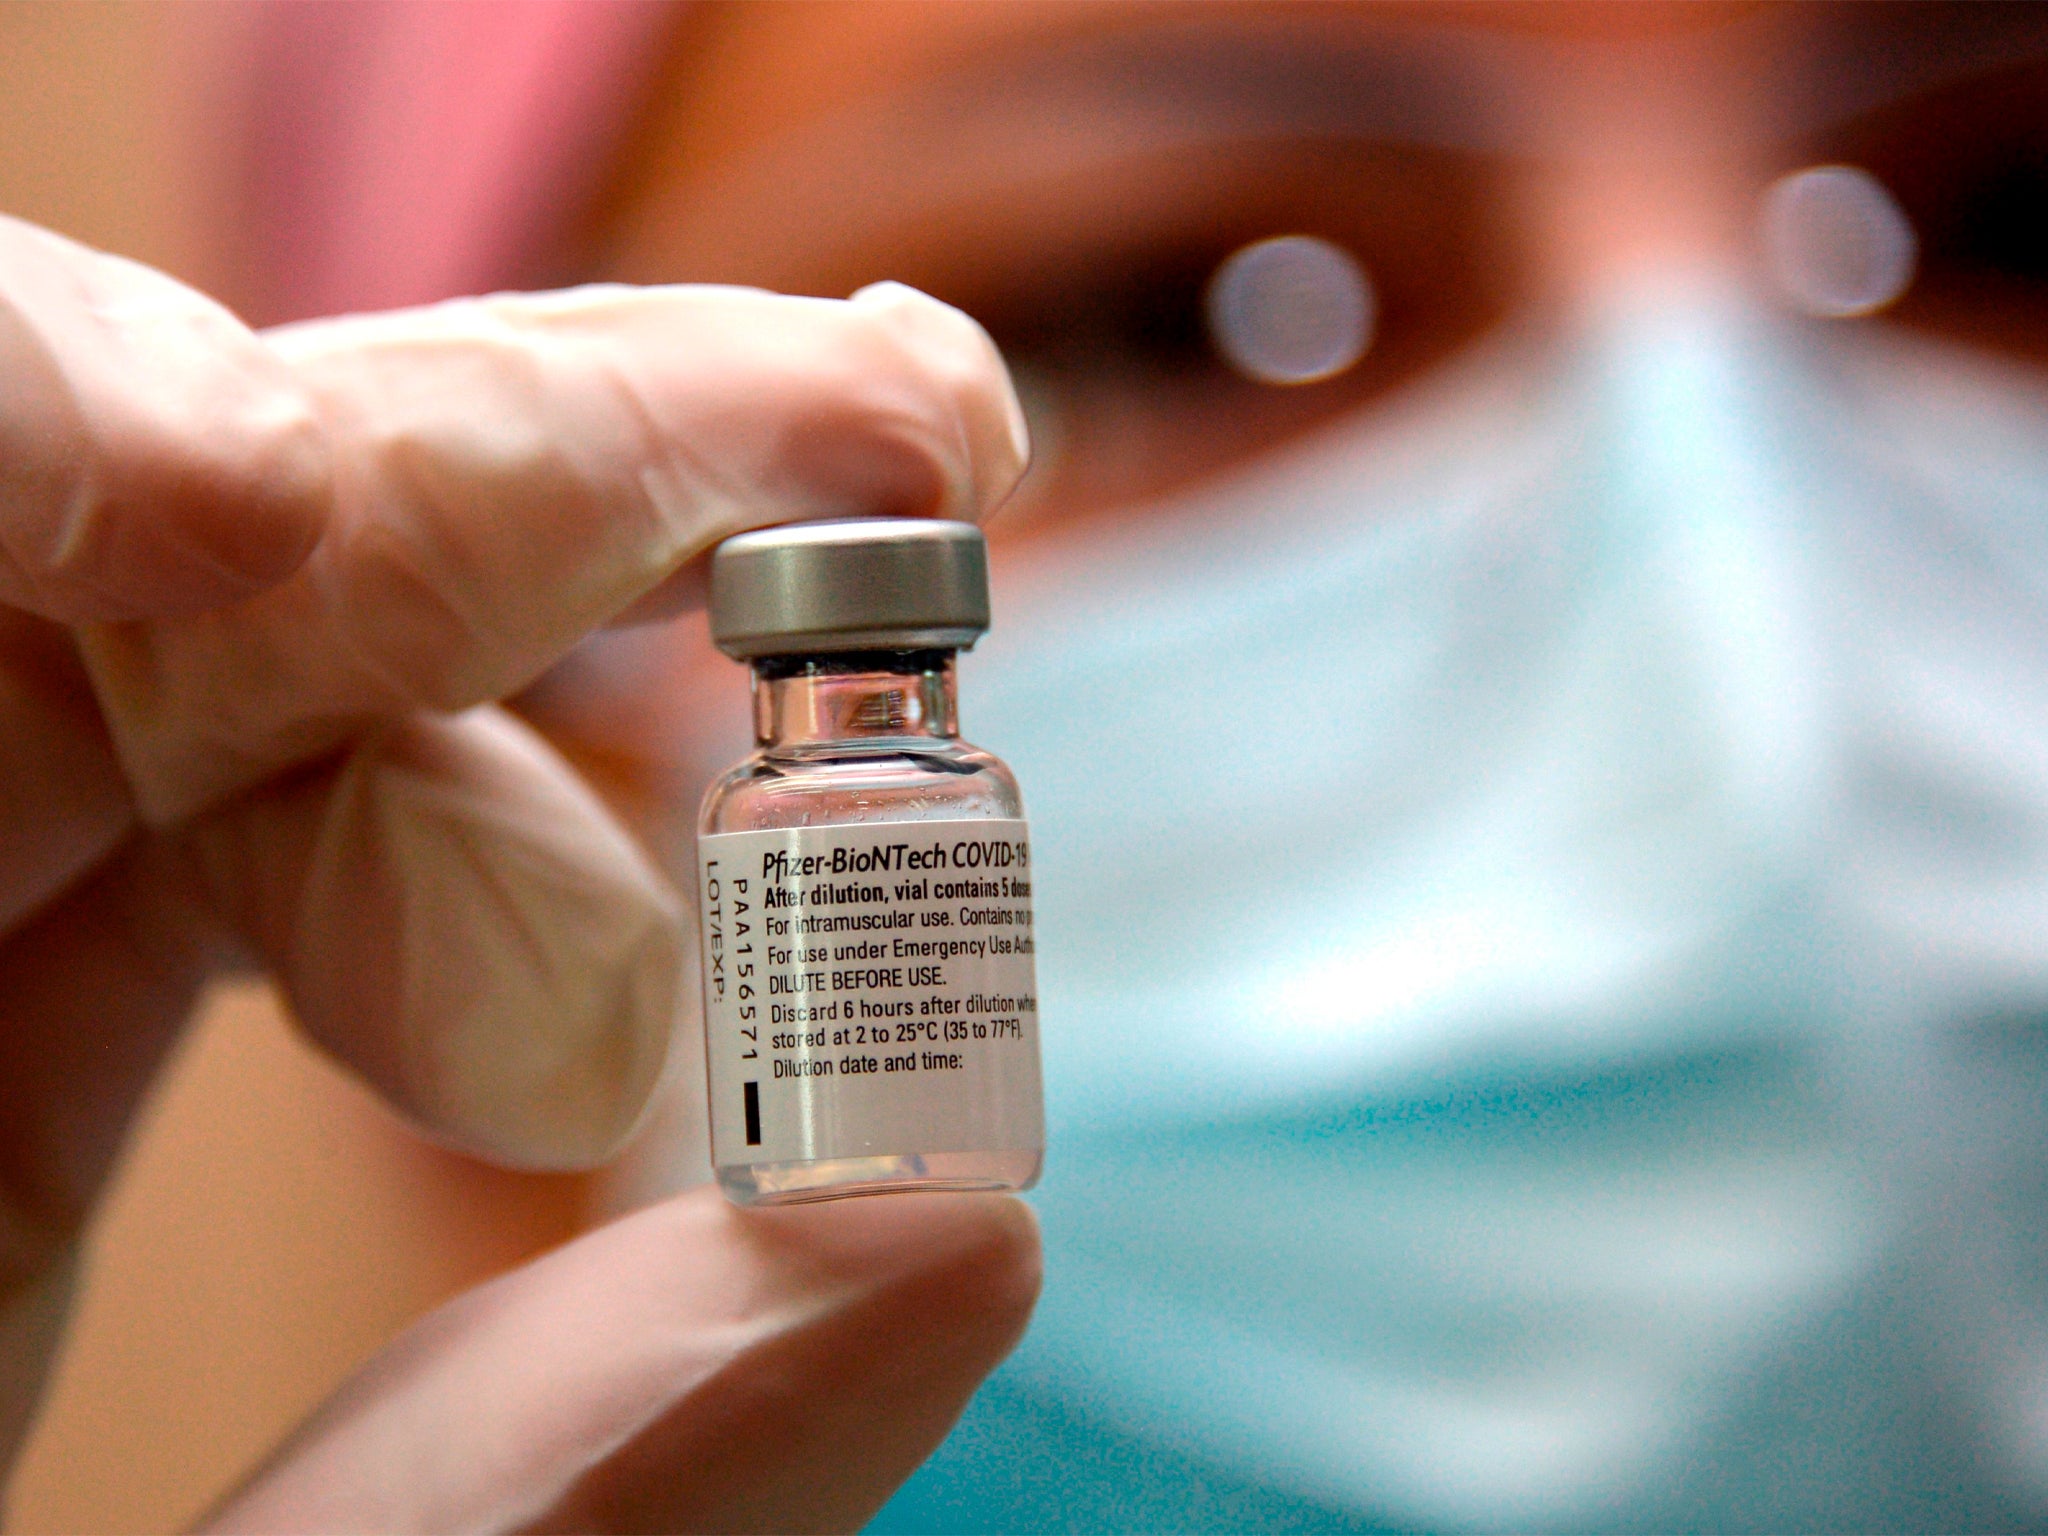 More than six million people have received at least one vaccine dose